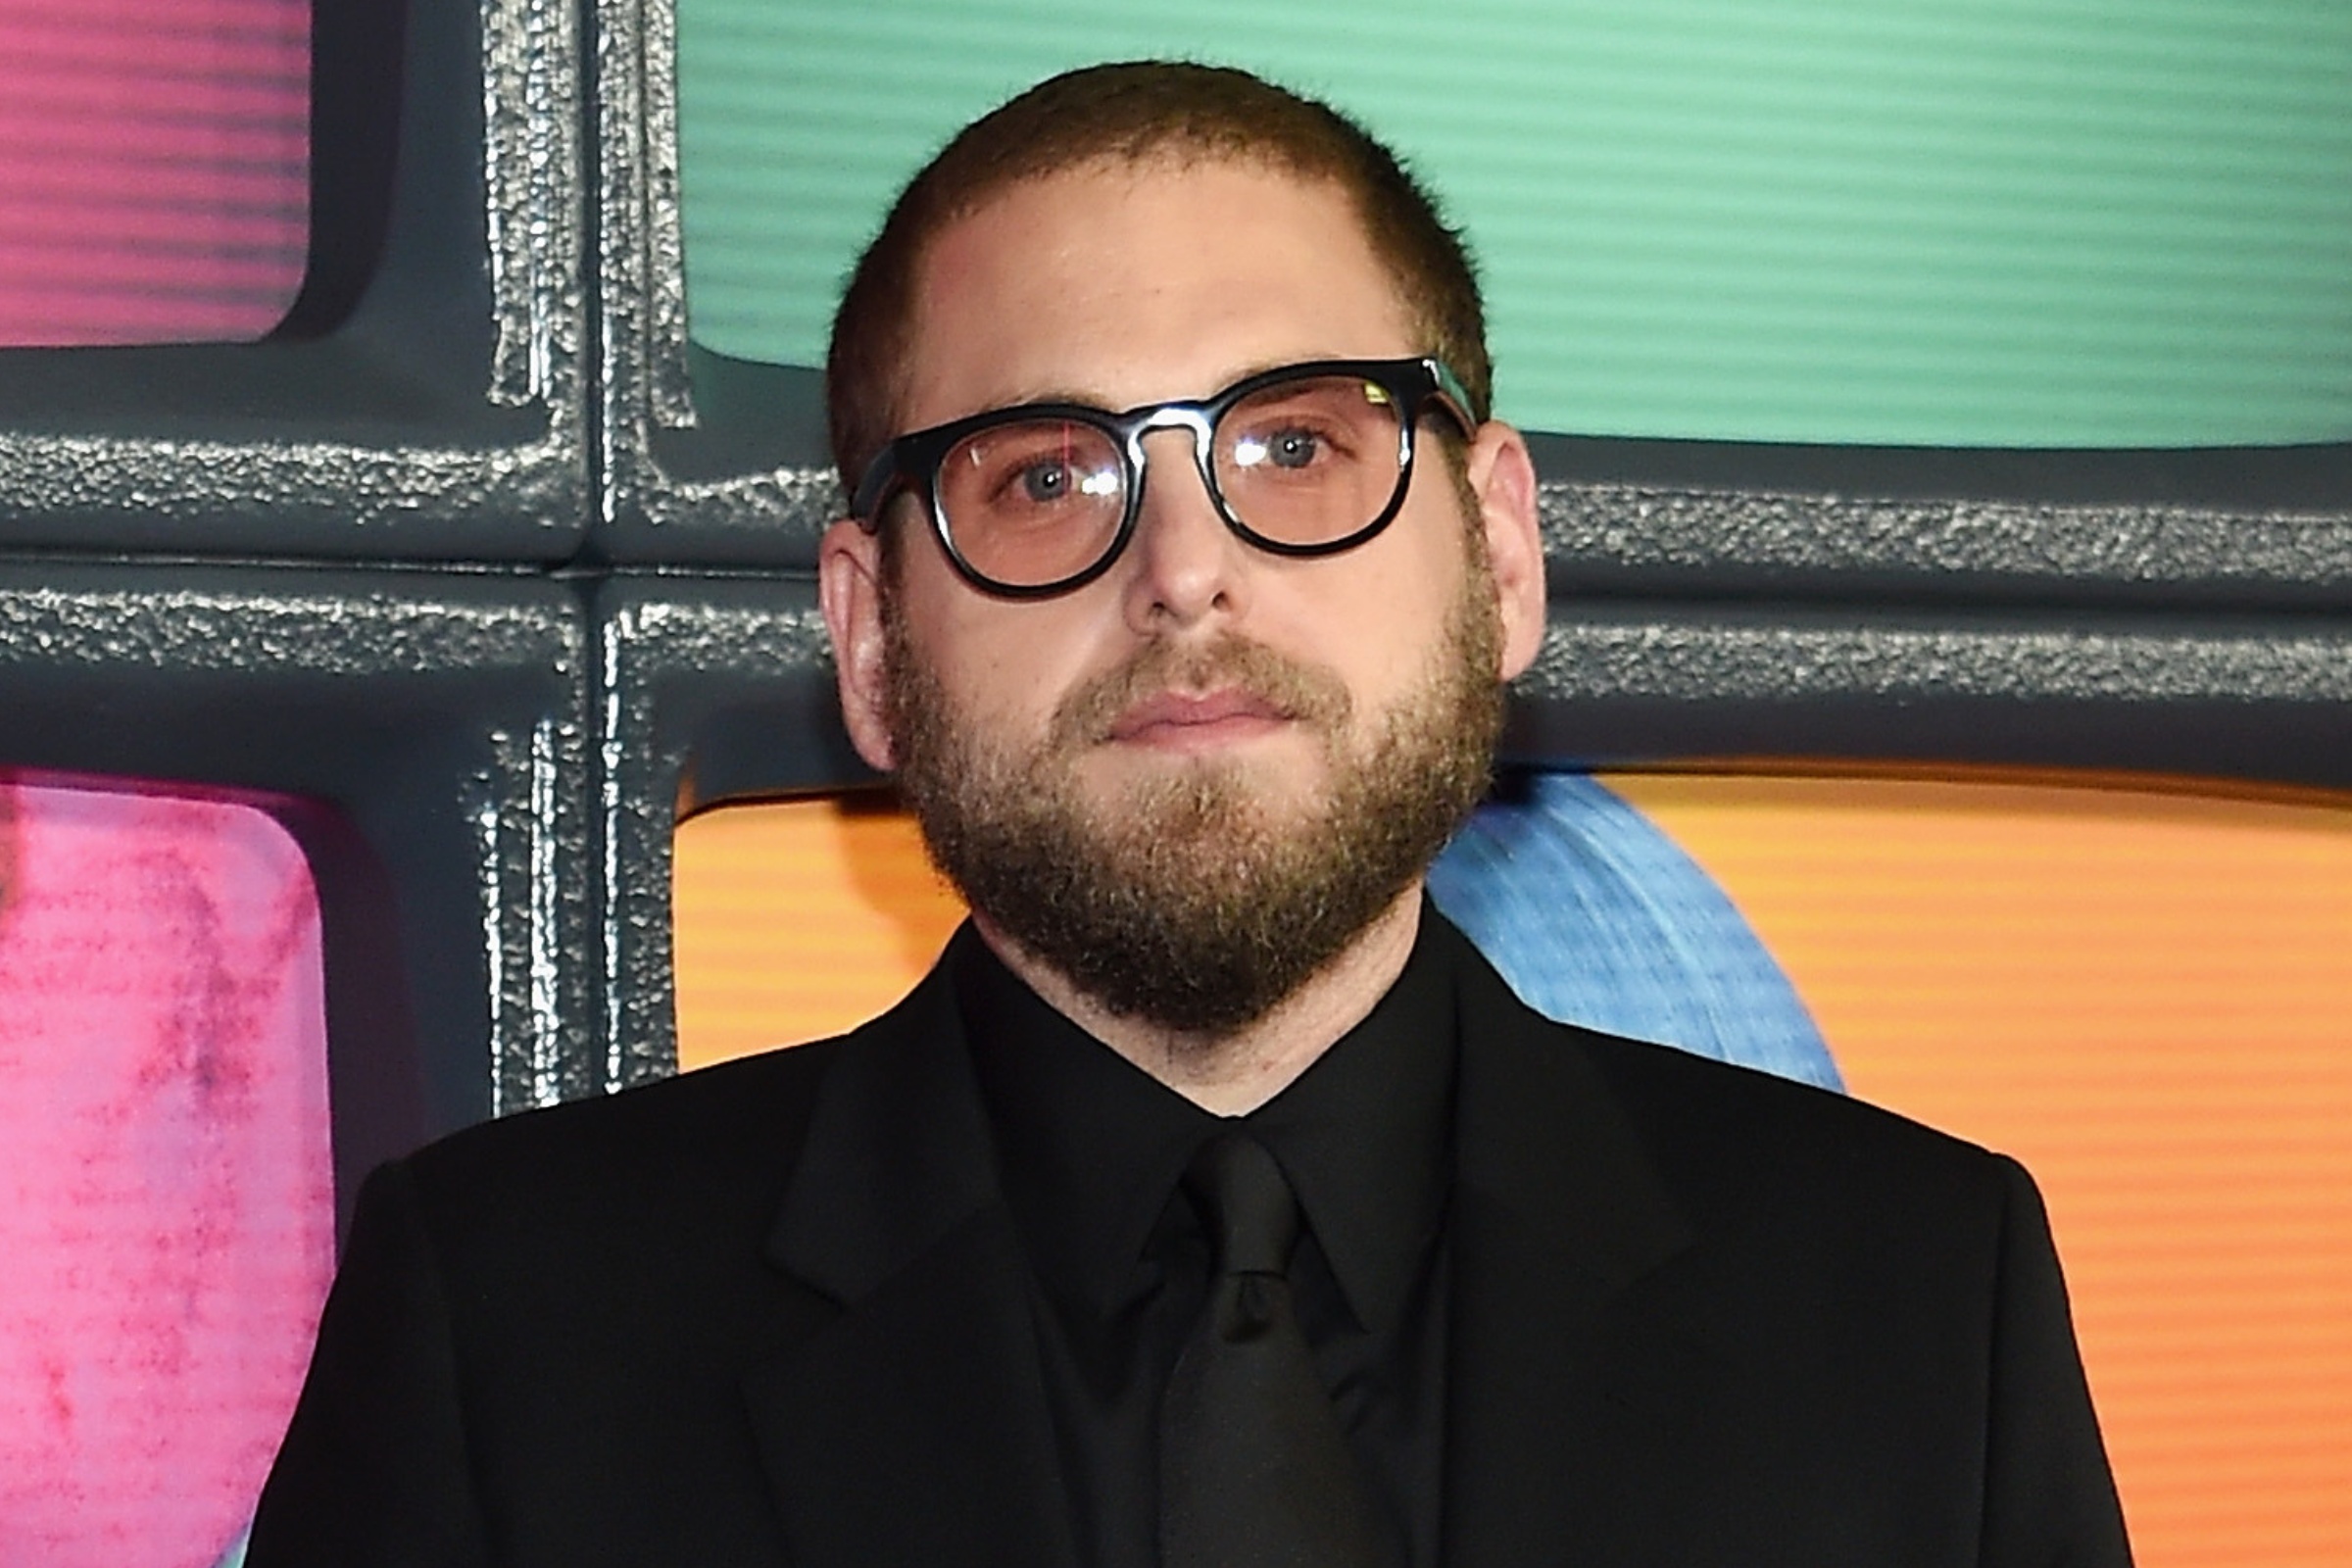 Have you seen Jonah Hill's new look? See his then and now photos